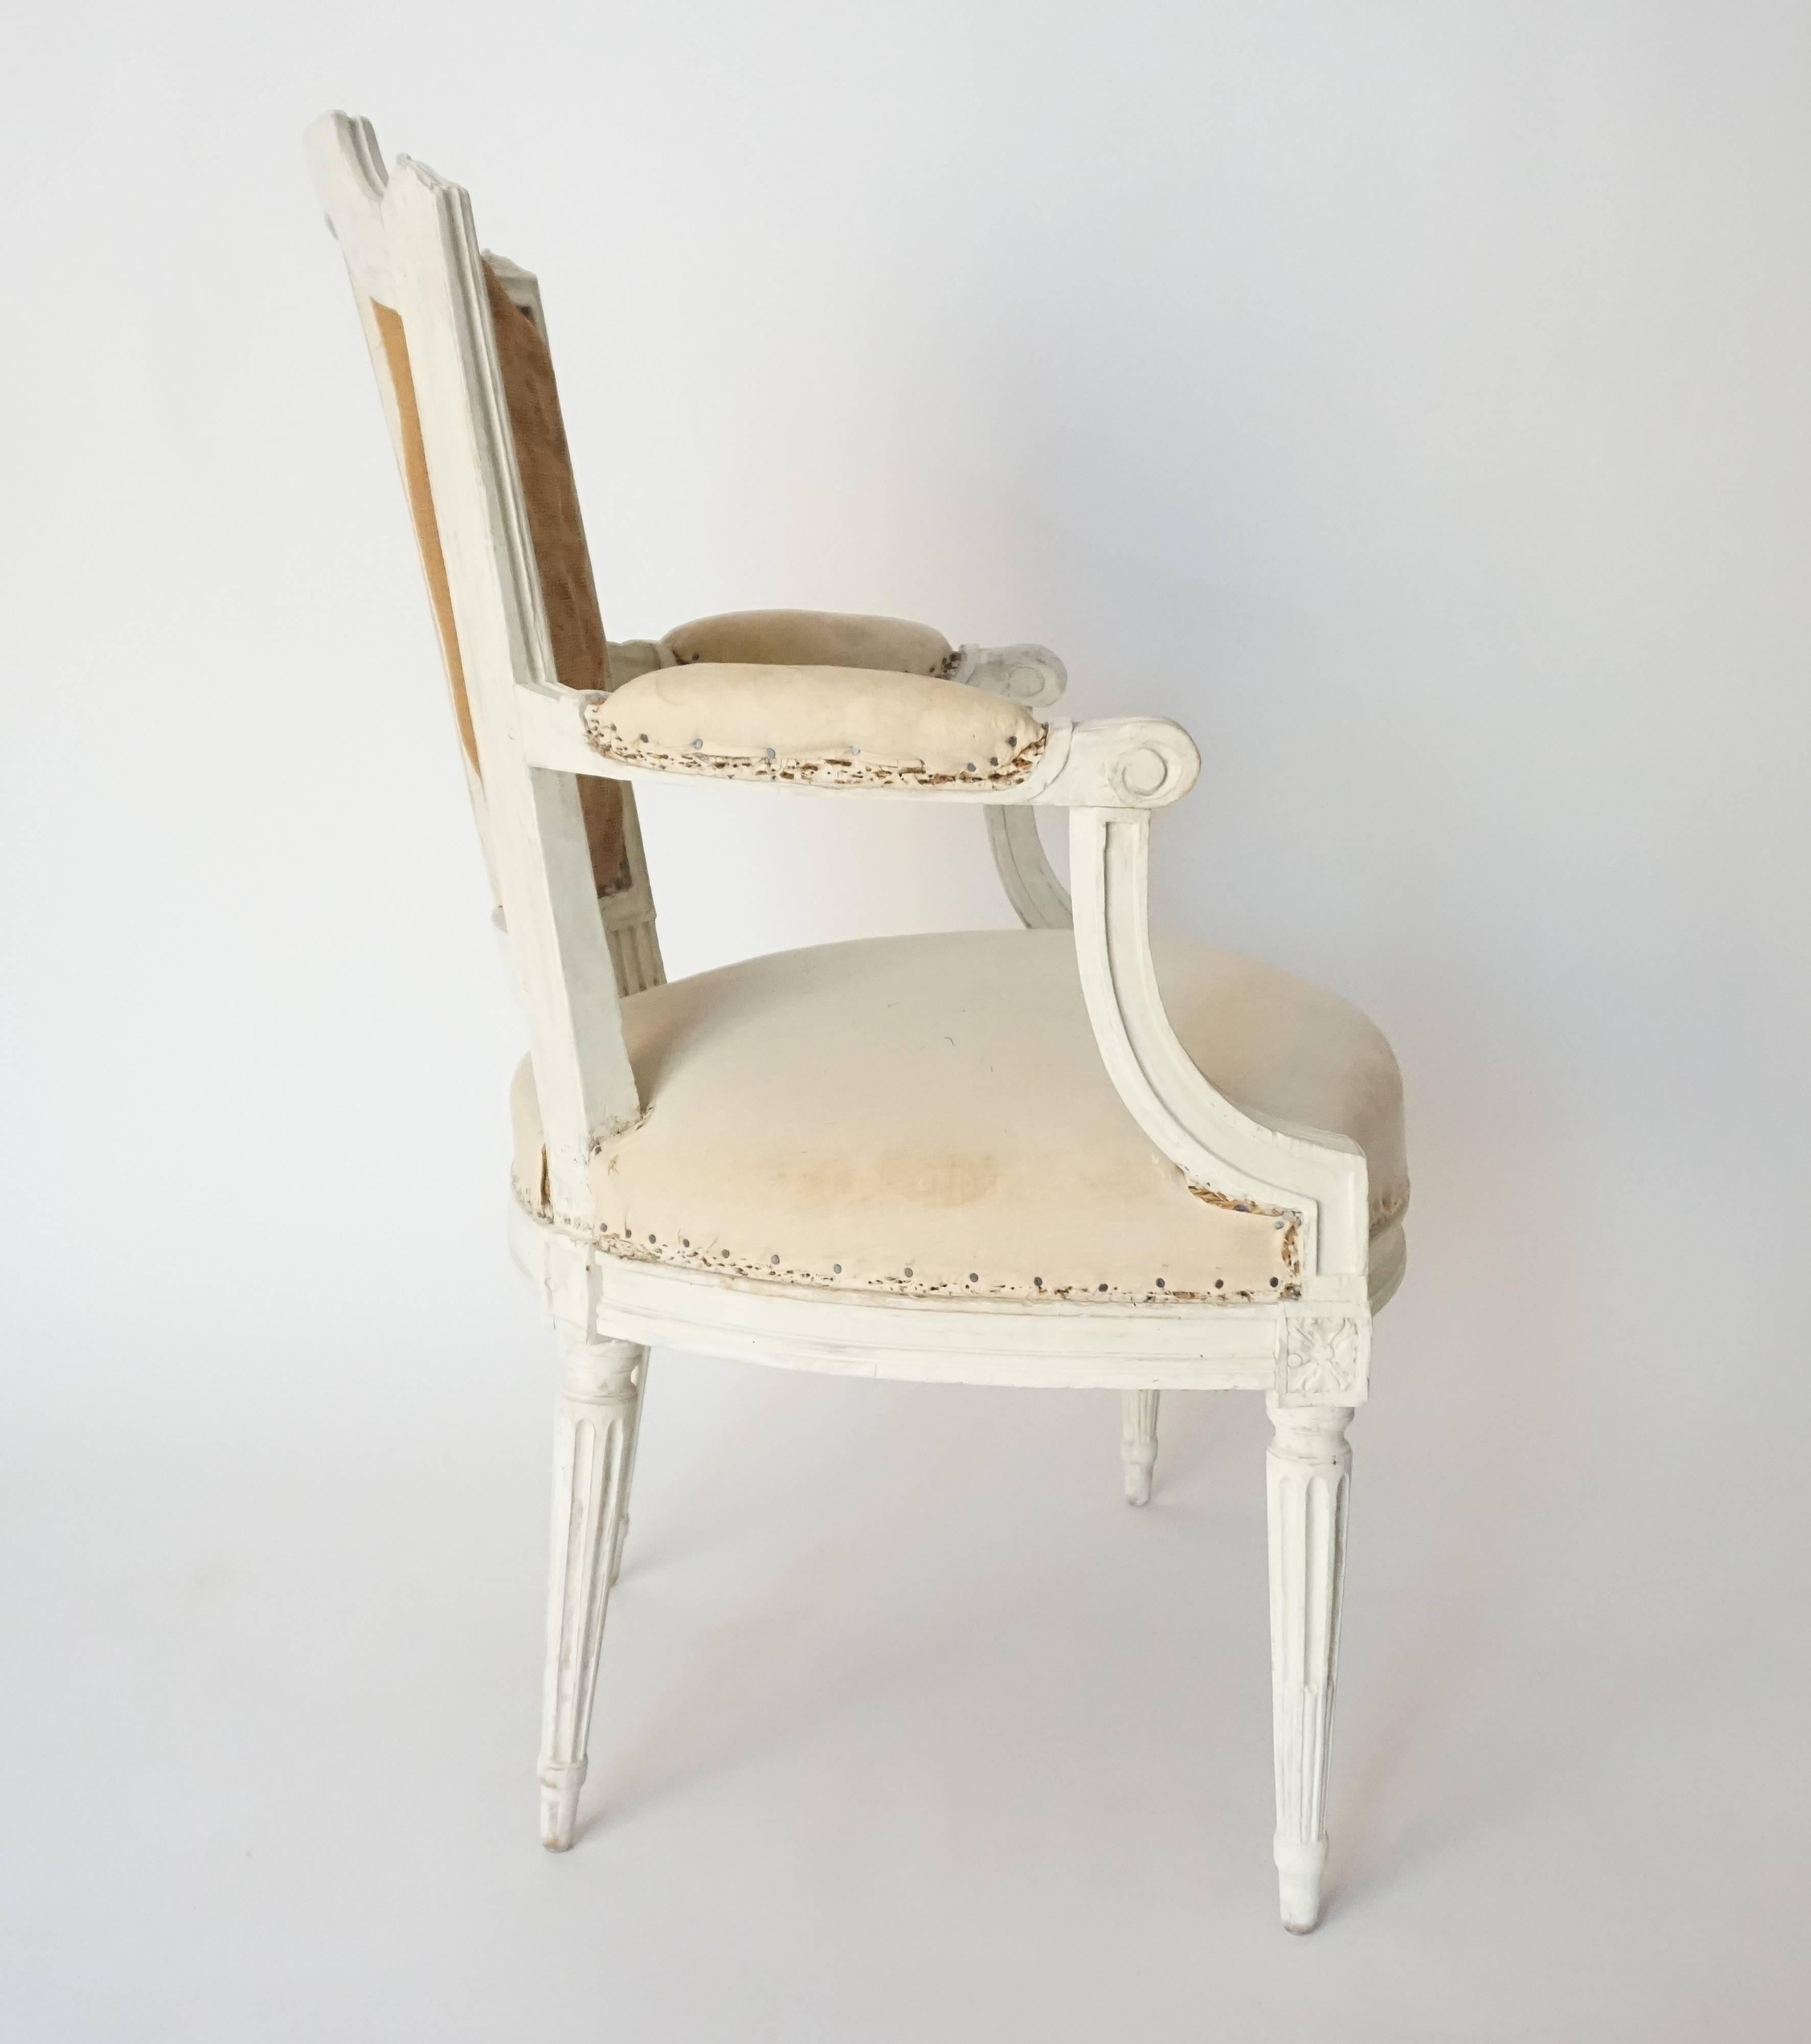 Hand-Painted Louis XVI Fauteuil or Armchair in Original Paint, Stamped, France, circa 1780